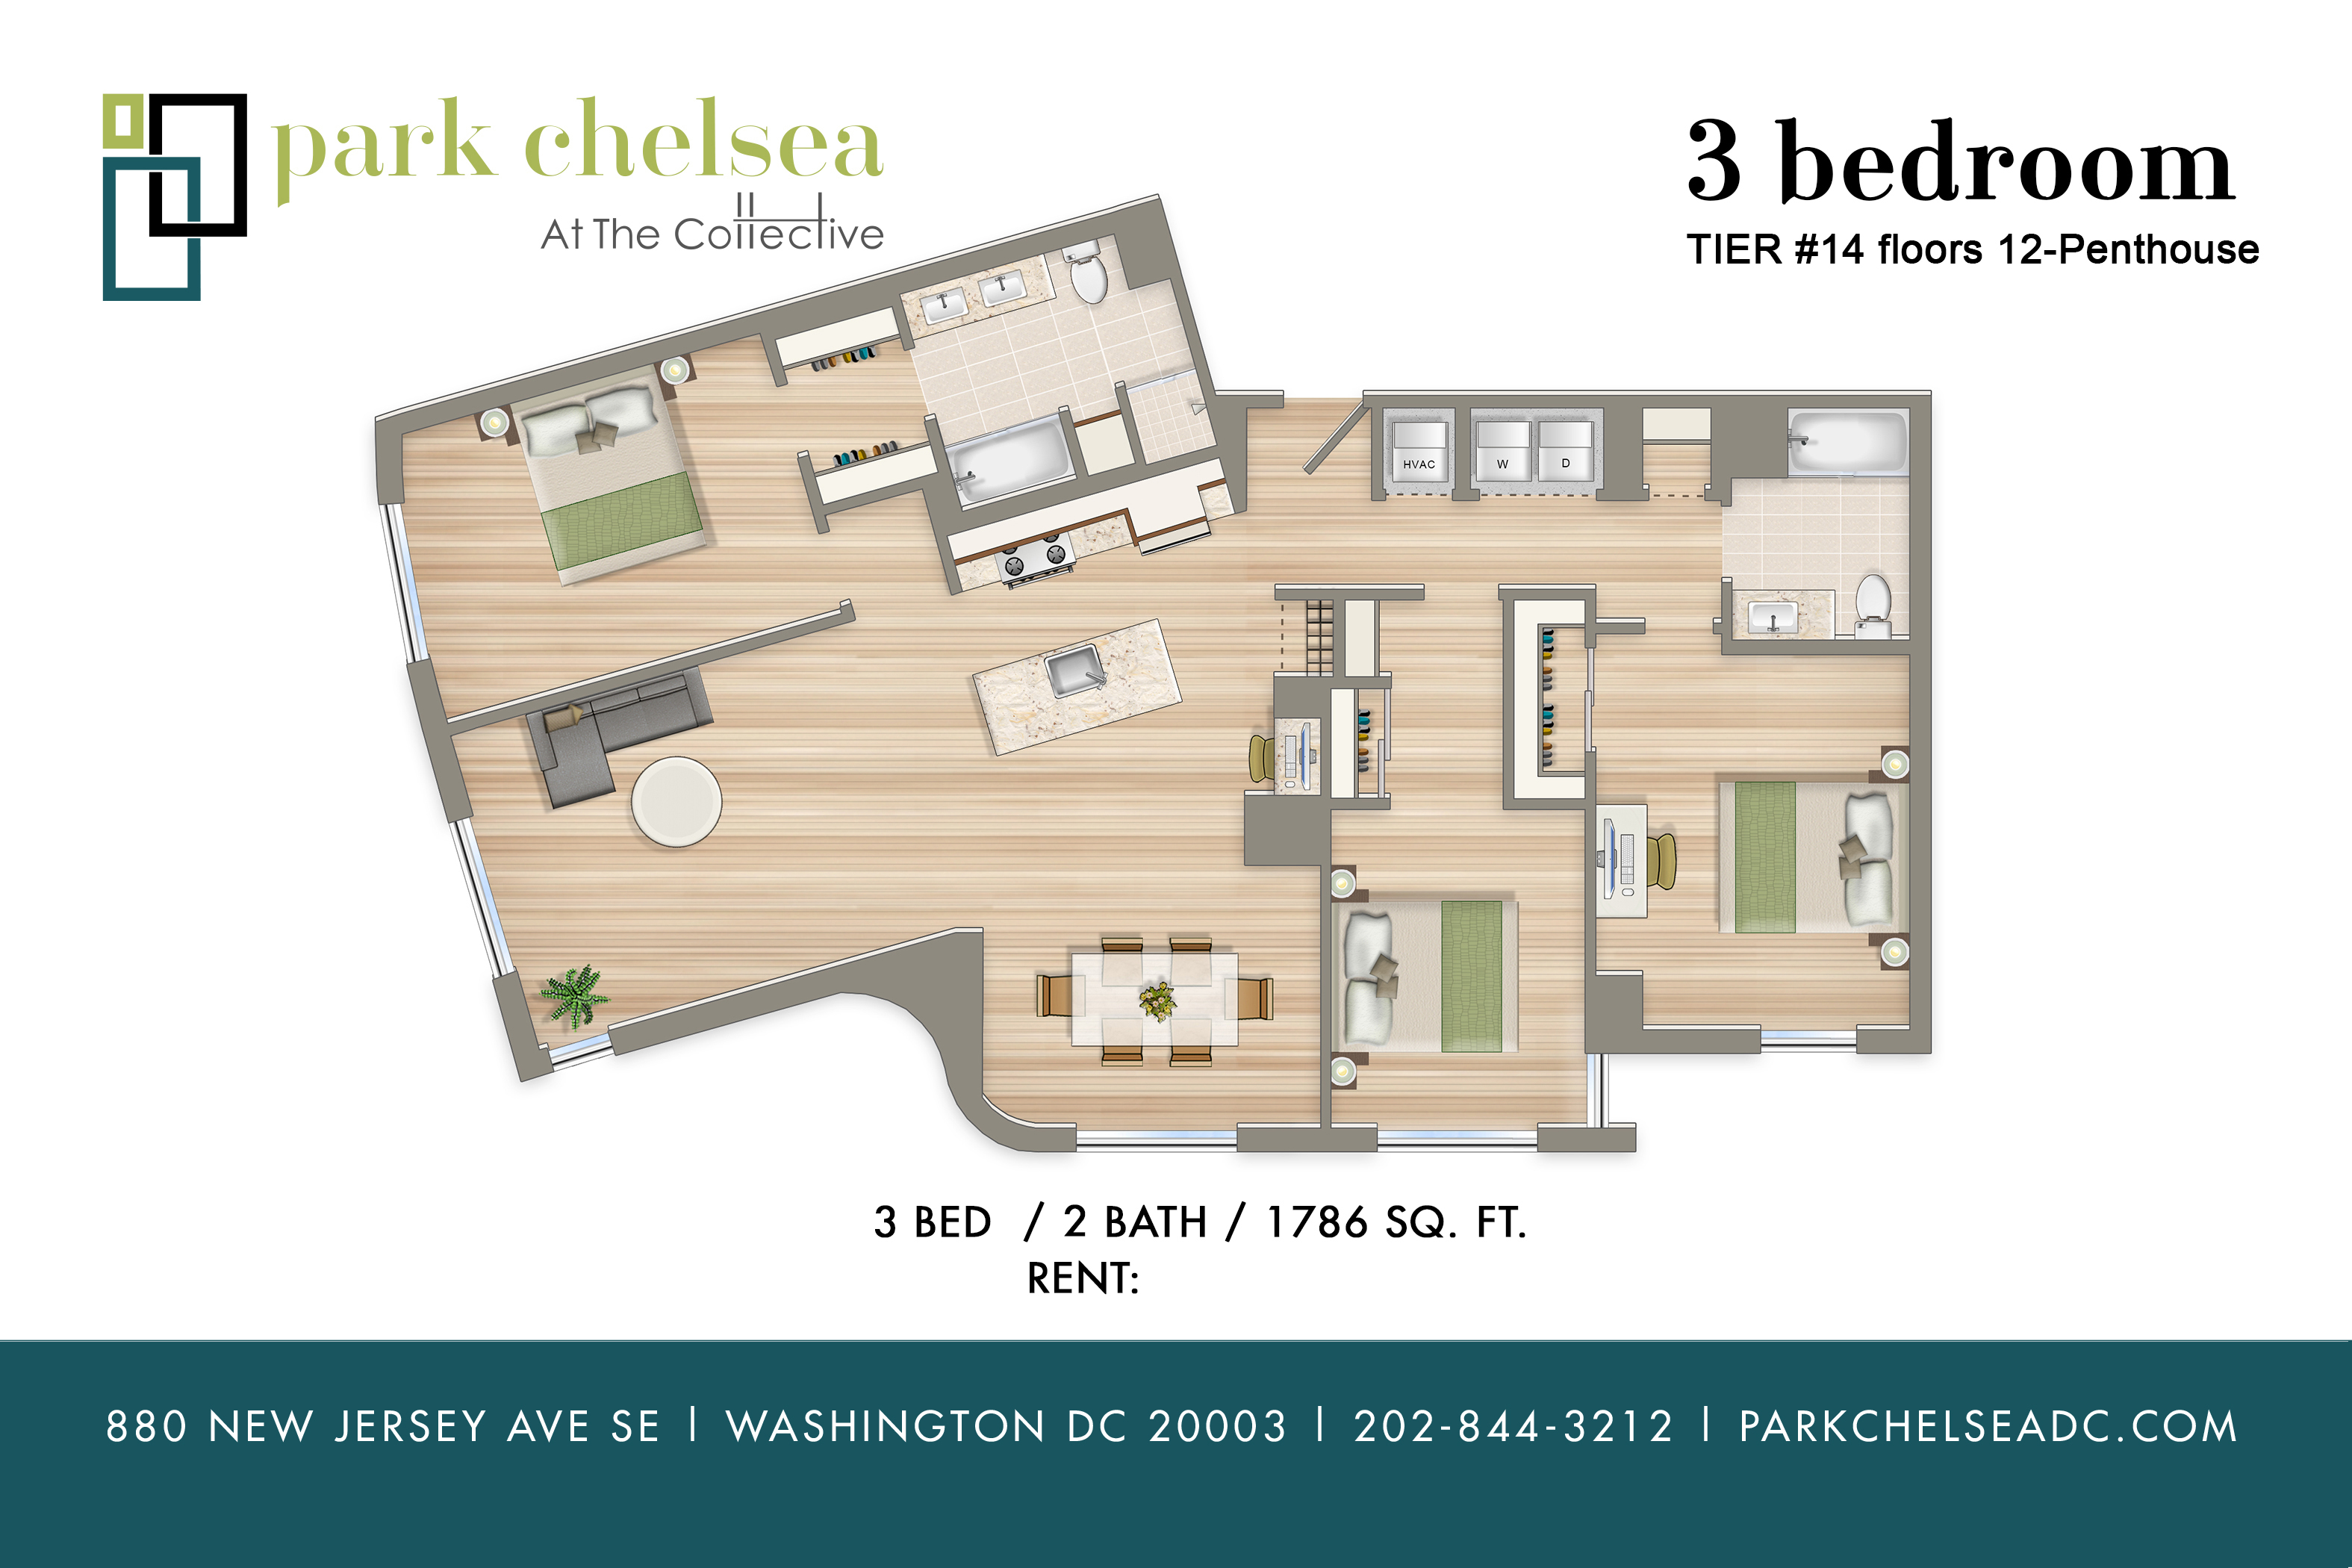 3 Bedroom Apartments In The Capitol Riverfront Navy Yard